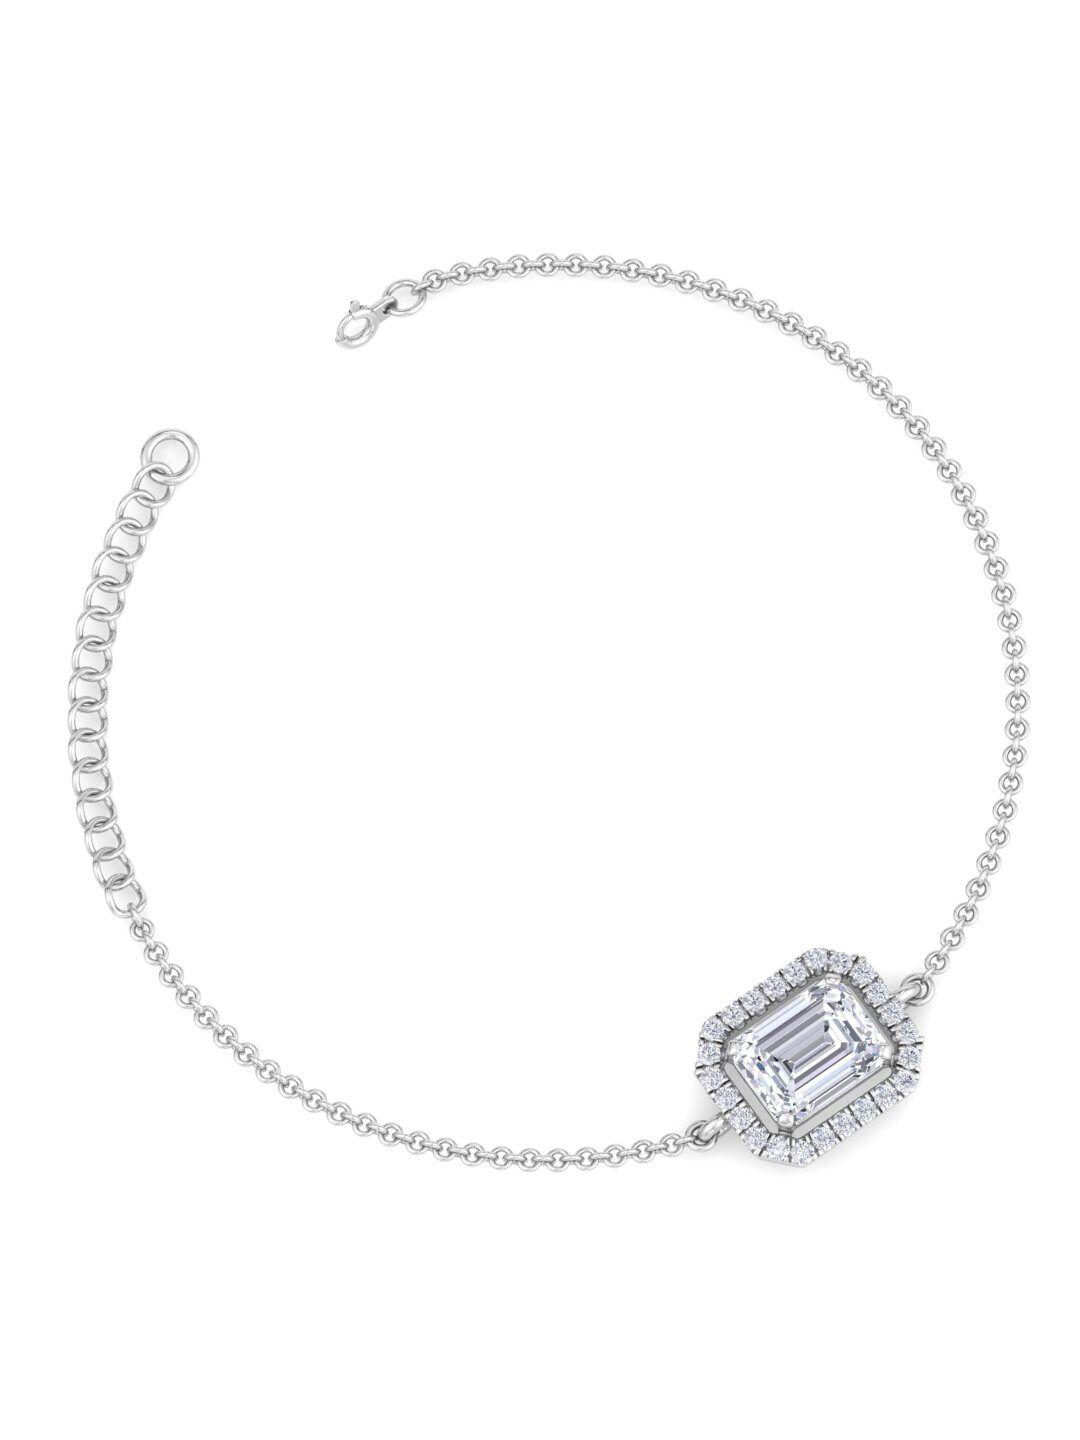 inddus jewels women silver-toned & white sterling silver cubic zirconia rhodium-plated link bracelet